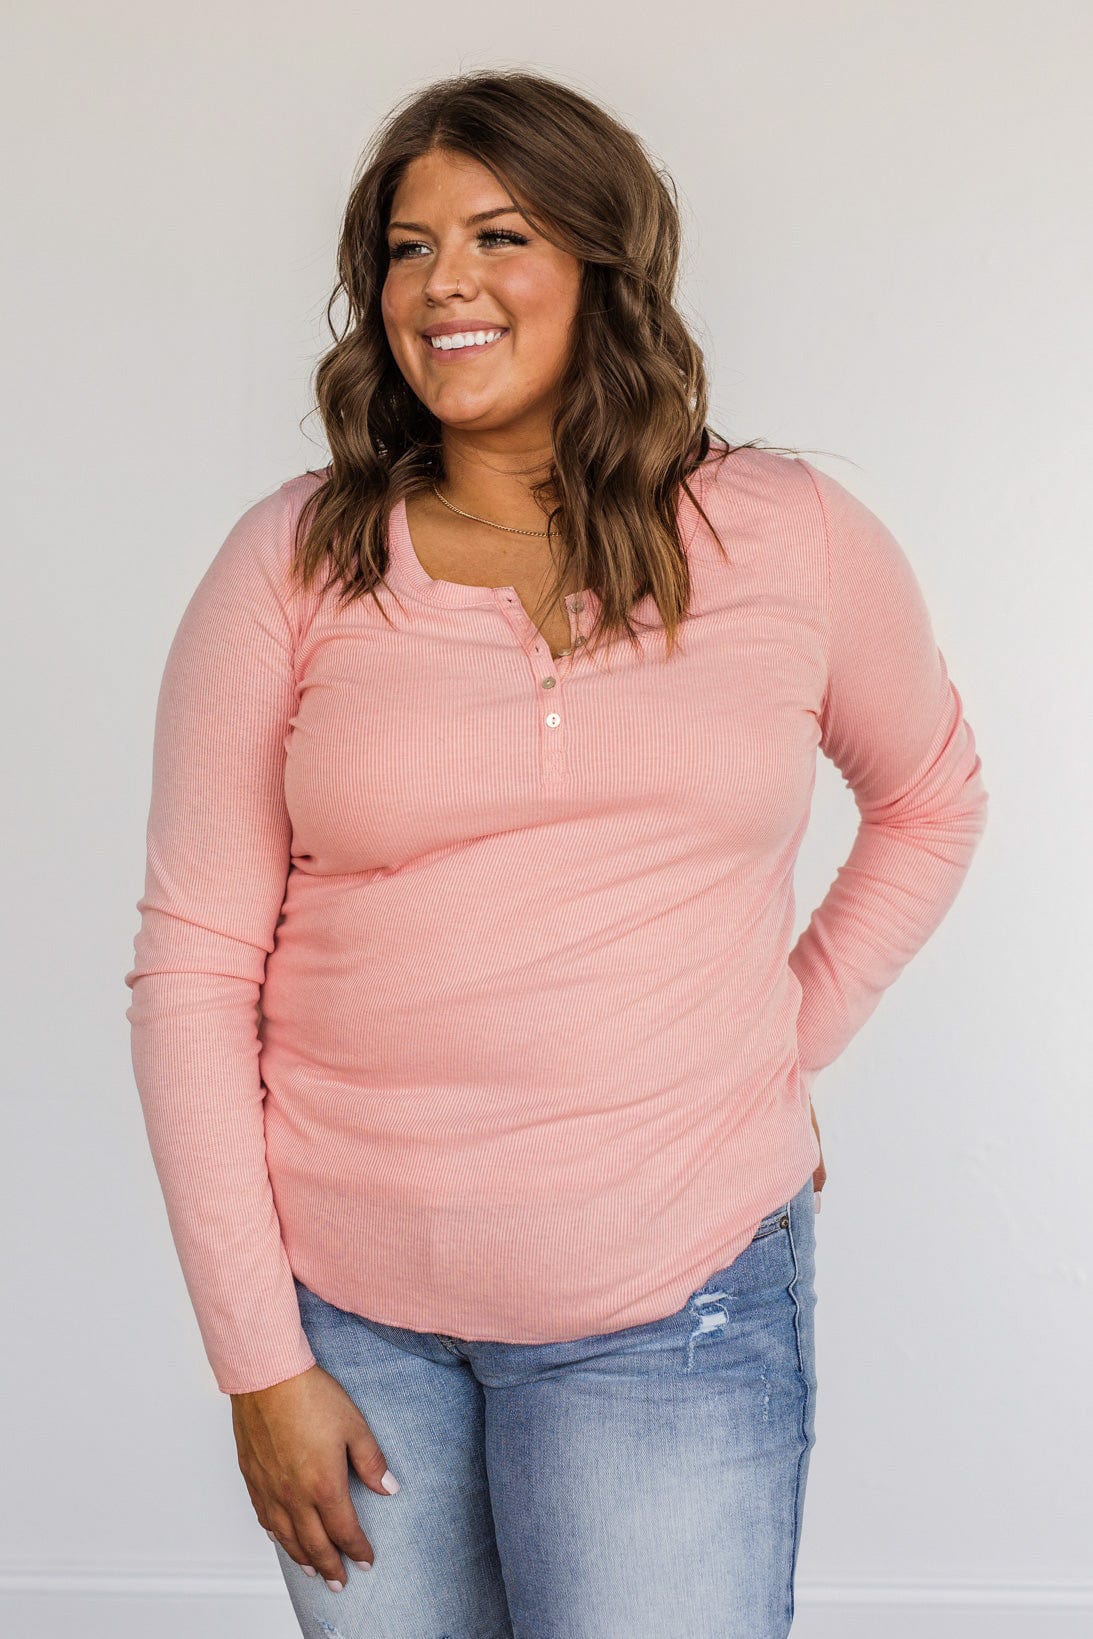 Piercing Beauty Floral Henley Top- Ivory – The Pulse Boutique